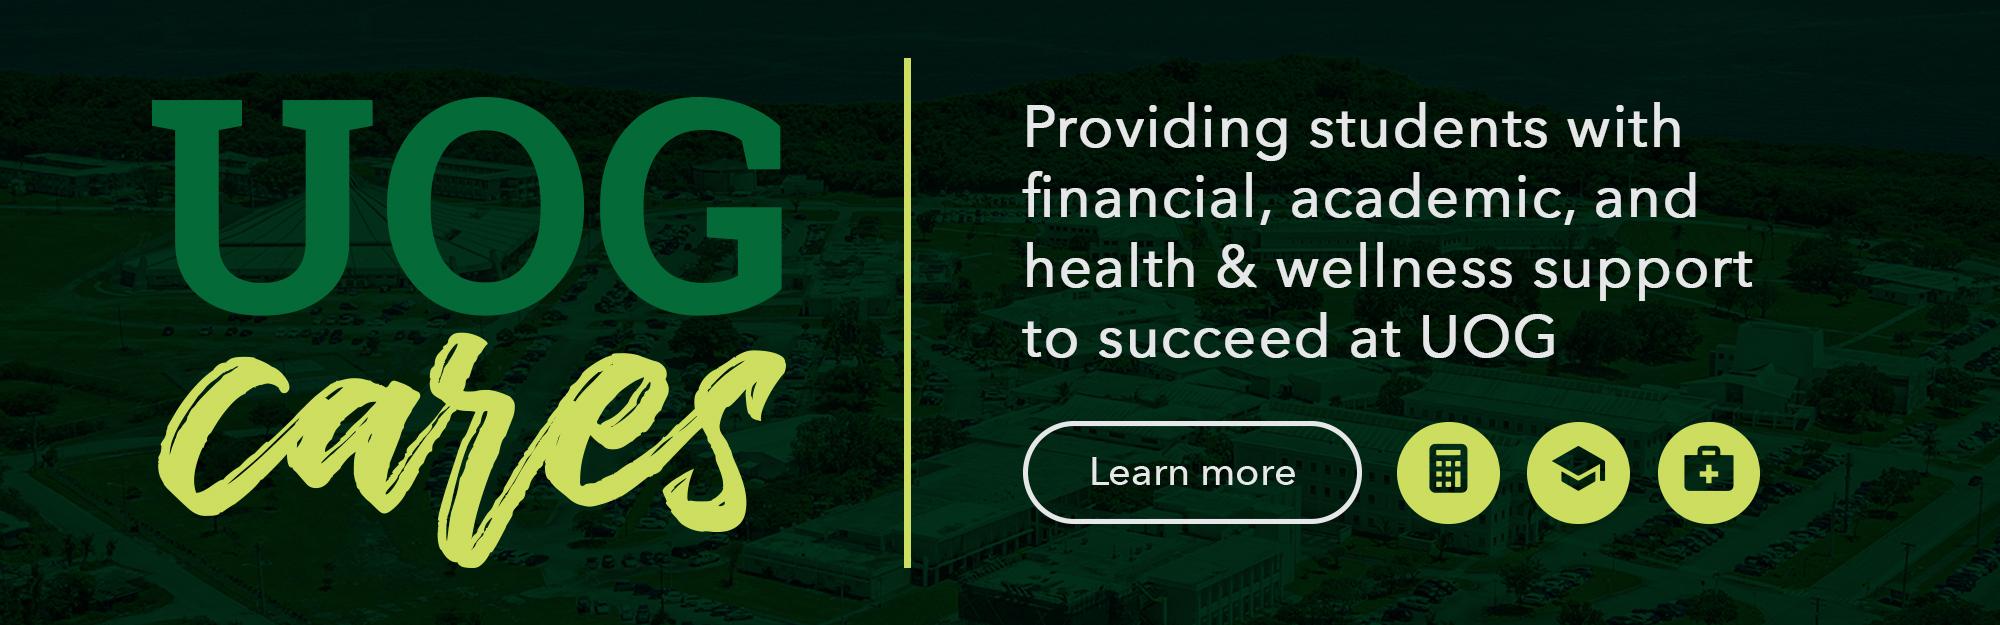 UOG CARES | Providing students with financial, academic, and health & wellness support to succeed at UOG